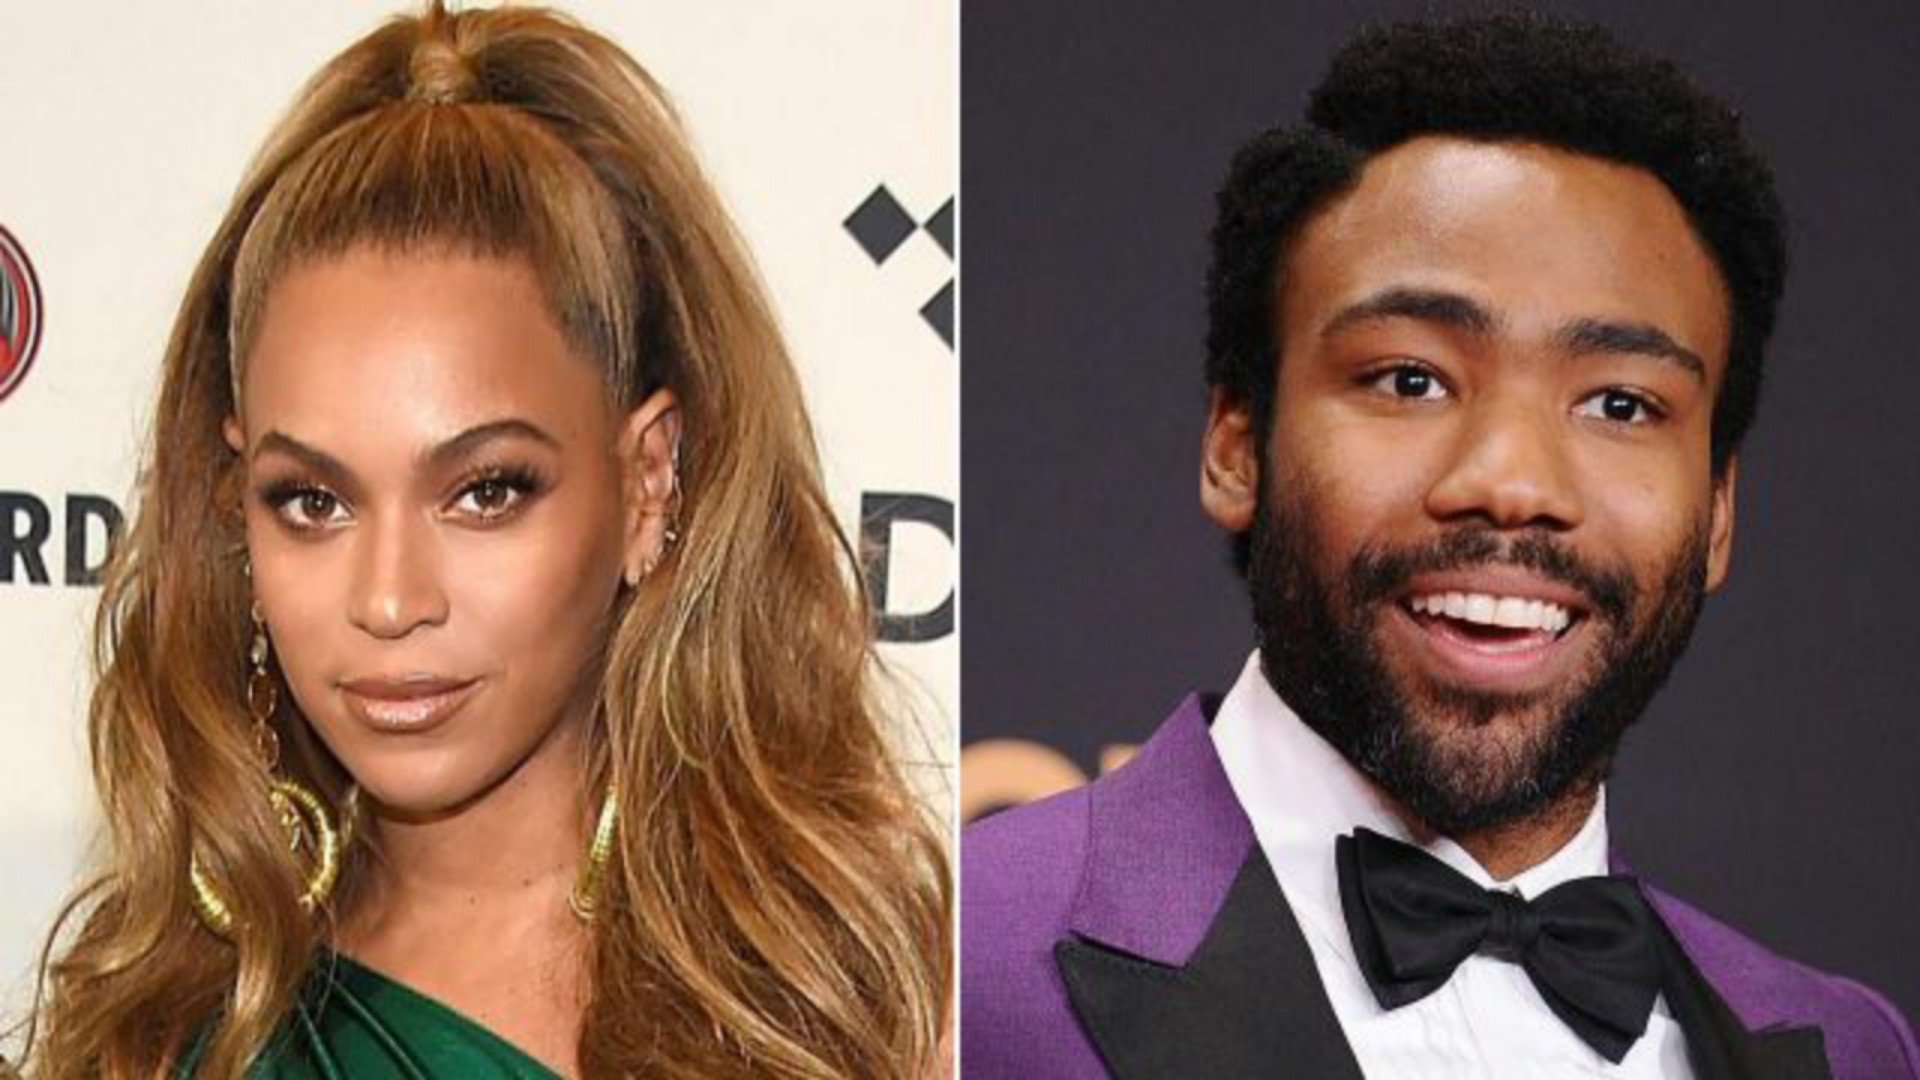 Listen: Beyonce & Donald Glover’s Version Of ‘Can You Feel The Love Tonight?’ From ‘The Lion King’ remake